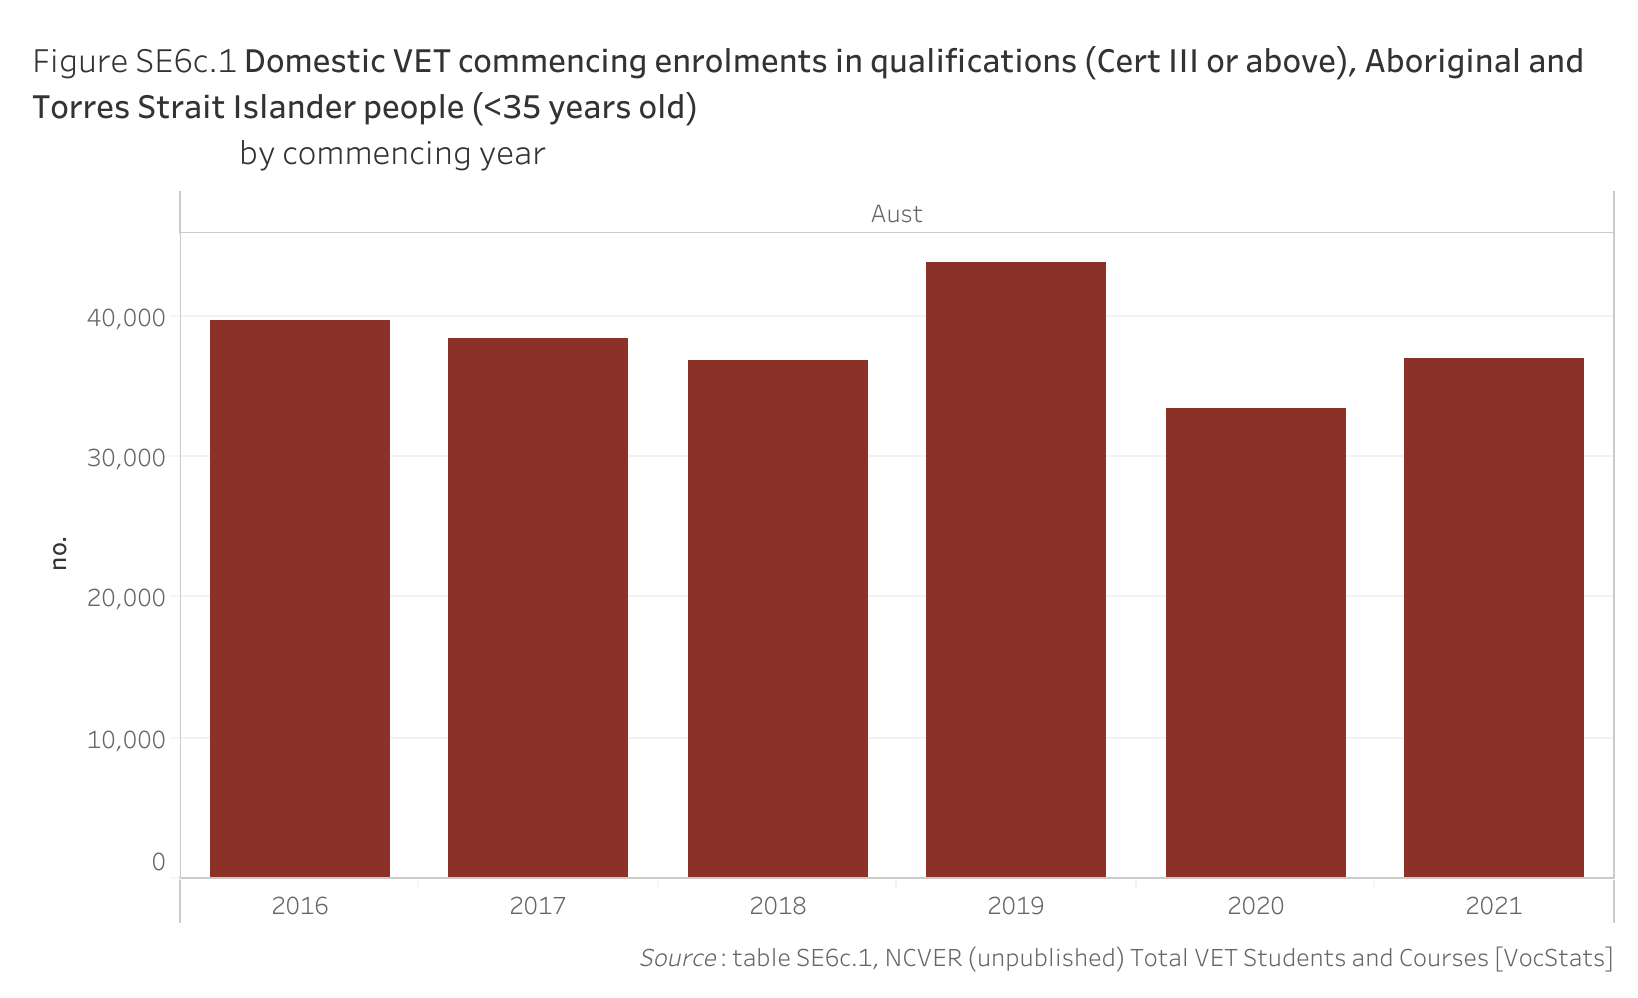 Figure SE6c.1 shows the domestic Vocational Education and Training commencing enrolments in qualifications (certificate three or above), Aboriginal and Torres Strait Islander people (is less than 35 years old), by commencing year. More details can be found within the text near this image.